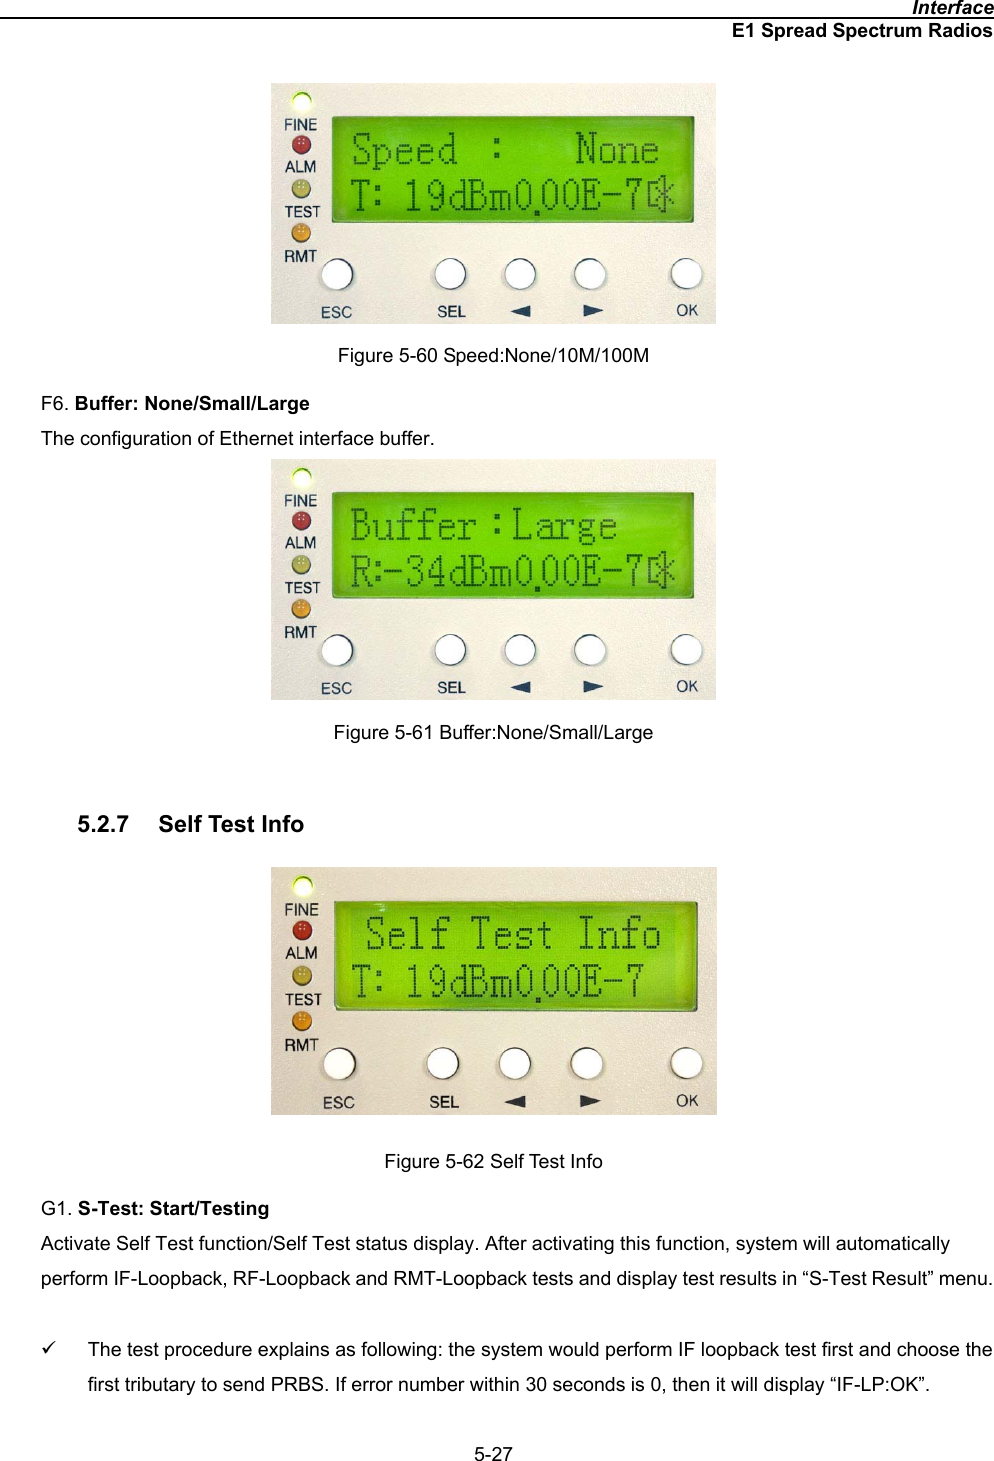                                                                                              InterfaceE1 Spread Spectrum Radios5-27Figure 5-60 Speed:None/10M/100M F6. Buffer: None/Small/LargeThe configuration of Ethernet interface buffer.   Figure 5-61 Buffer:None/Small/Large 5.2.7  Self Test Info Figure 5-62 Self Test Info G1. S-Test: Start/Testing Activate Self Test function/Self Test status display. After activating this function, system will automatically perform IF-Loopback, RF-Loopback and RMT-Loopback tests and display test results in “S-Test Result” menu. 9  The test procedure explains as following: the system would perform IF loopback test first and choose the first tributary to send PRBS. If error number within 30 seconds is 0, then it will display “IF-LP:OK”. 